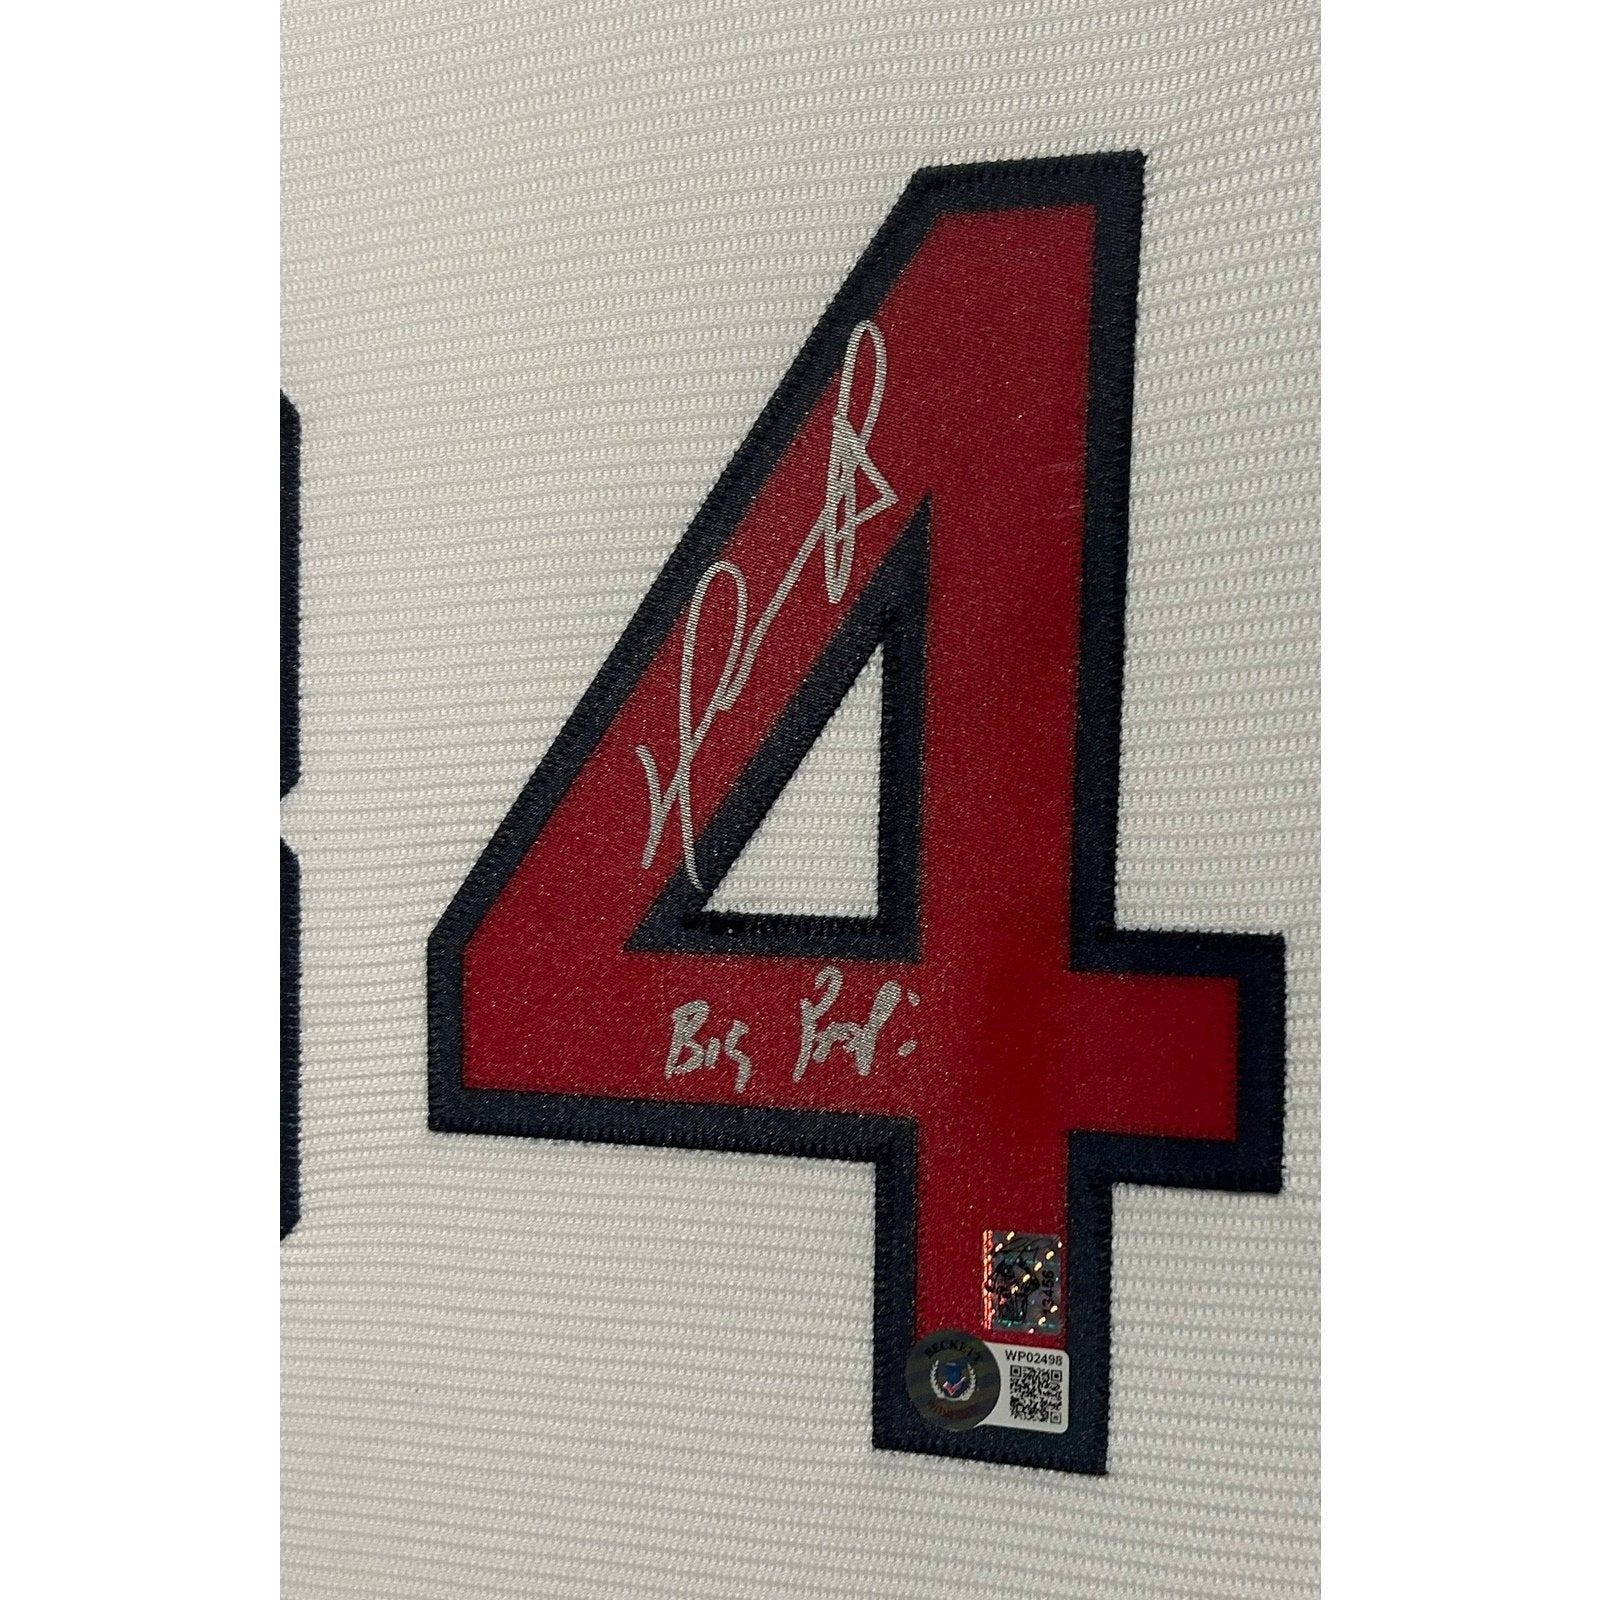 David Ortiz Signed Boston Red Sox Jersey Hall Of Fame 22 Fathers Day Beckett